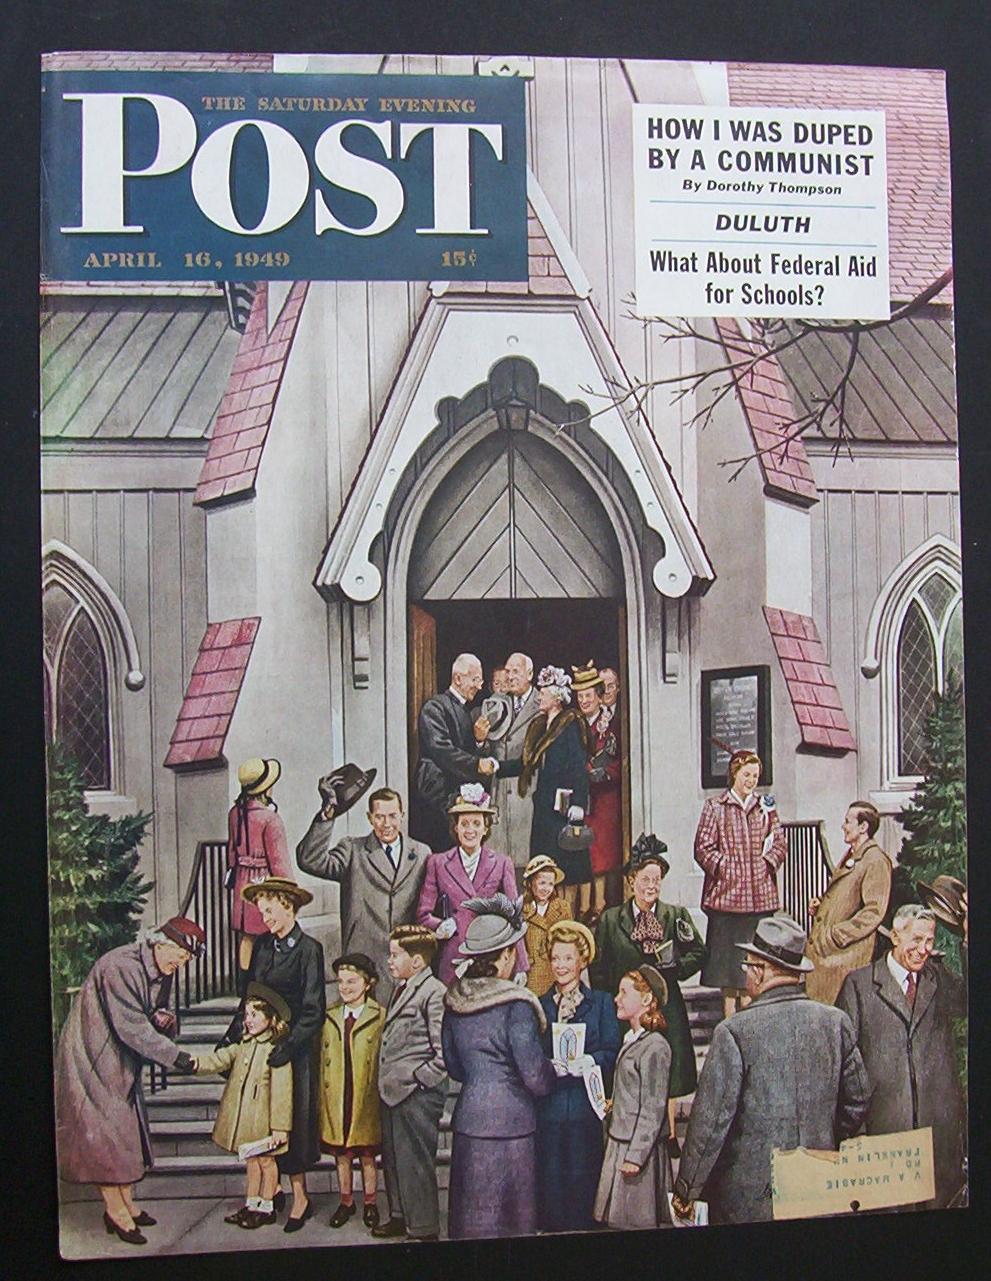 Signed lower left by Artist

The Saturday Evening Post cover, April 16, 1949